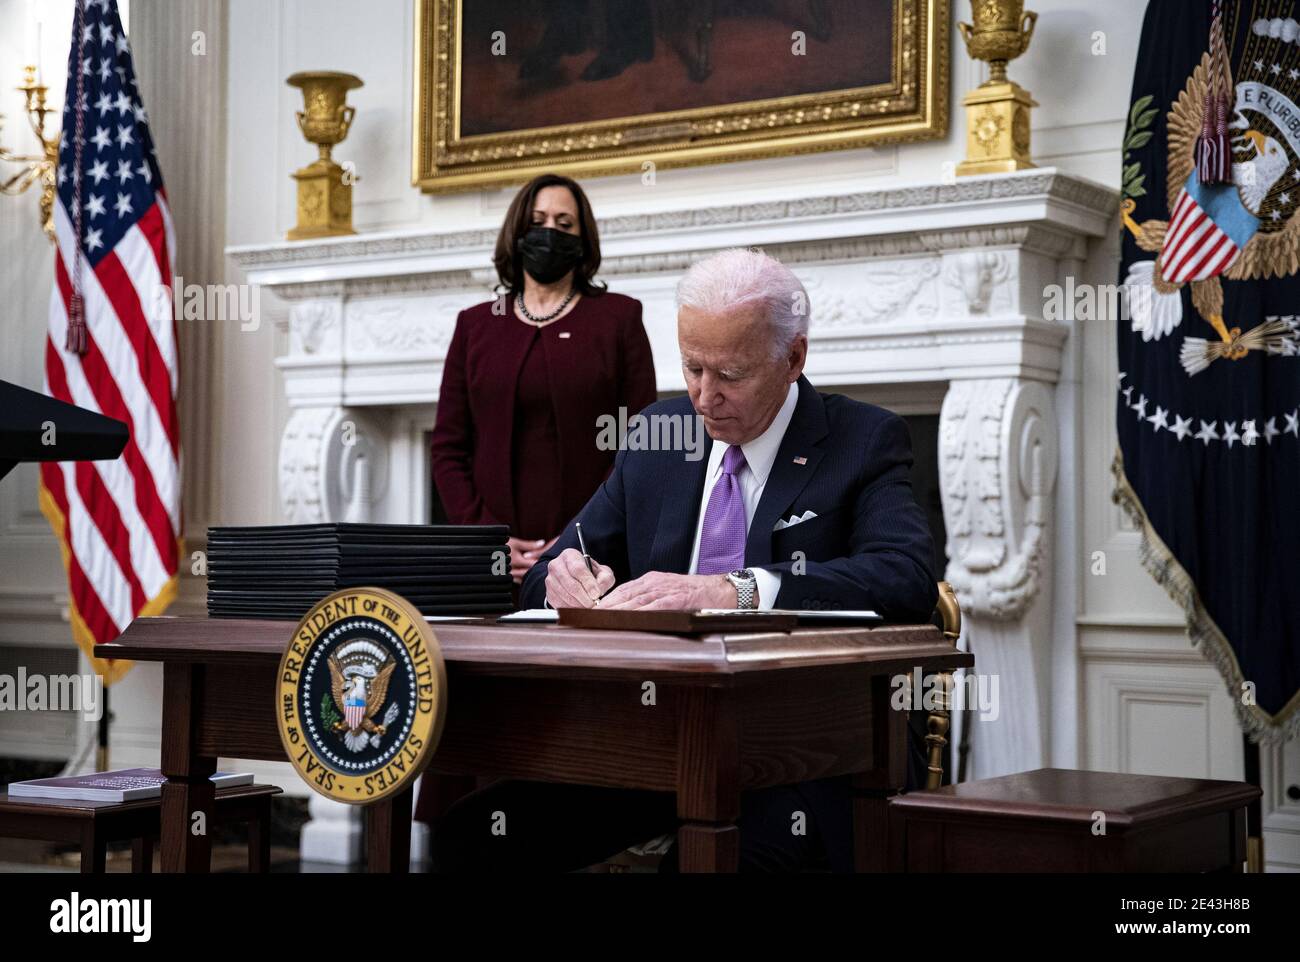 Washington, United States. 21st Jan, 2021. U.S. President Joe Biden signs an executive order during an event on his administration's Covid-19 response in the State Dining Room of the White House in Washington, DC, U.S., on Thursday, Jan. 21, 2021. Biden in his first full day in office plans to issue a sweeping set of executive orders to tackle the raging Covid-19 pandemic that will rapidly reverse or refashion many of his predecessor's most heavily criticized policies. Photo by Al Drago/UPI Credit: UPI/Alamy Live News Stock Photo